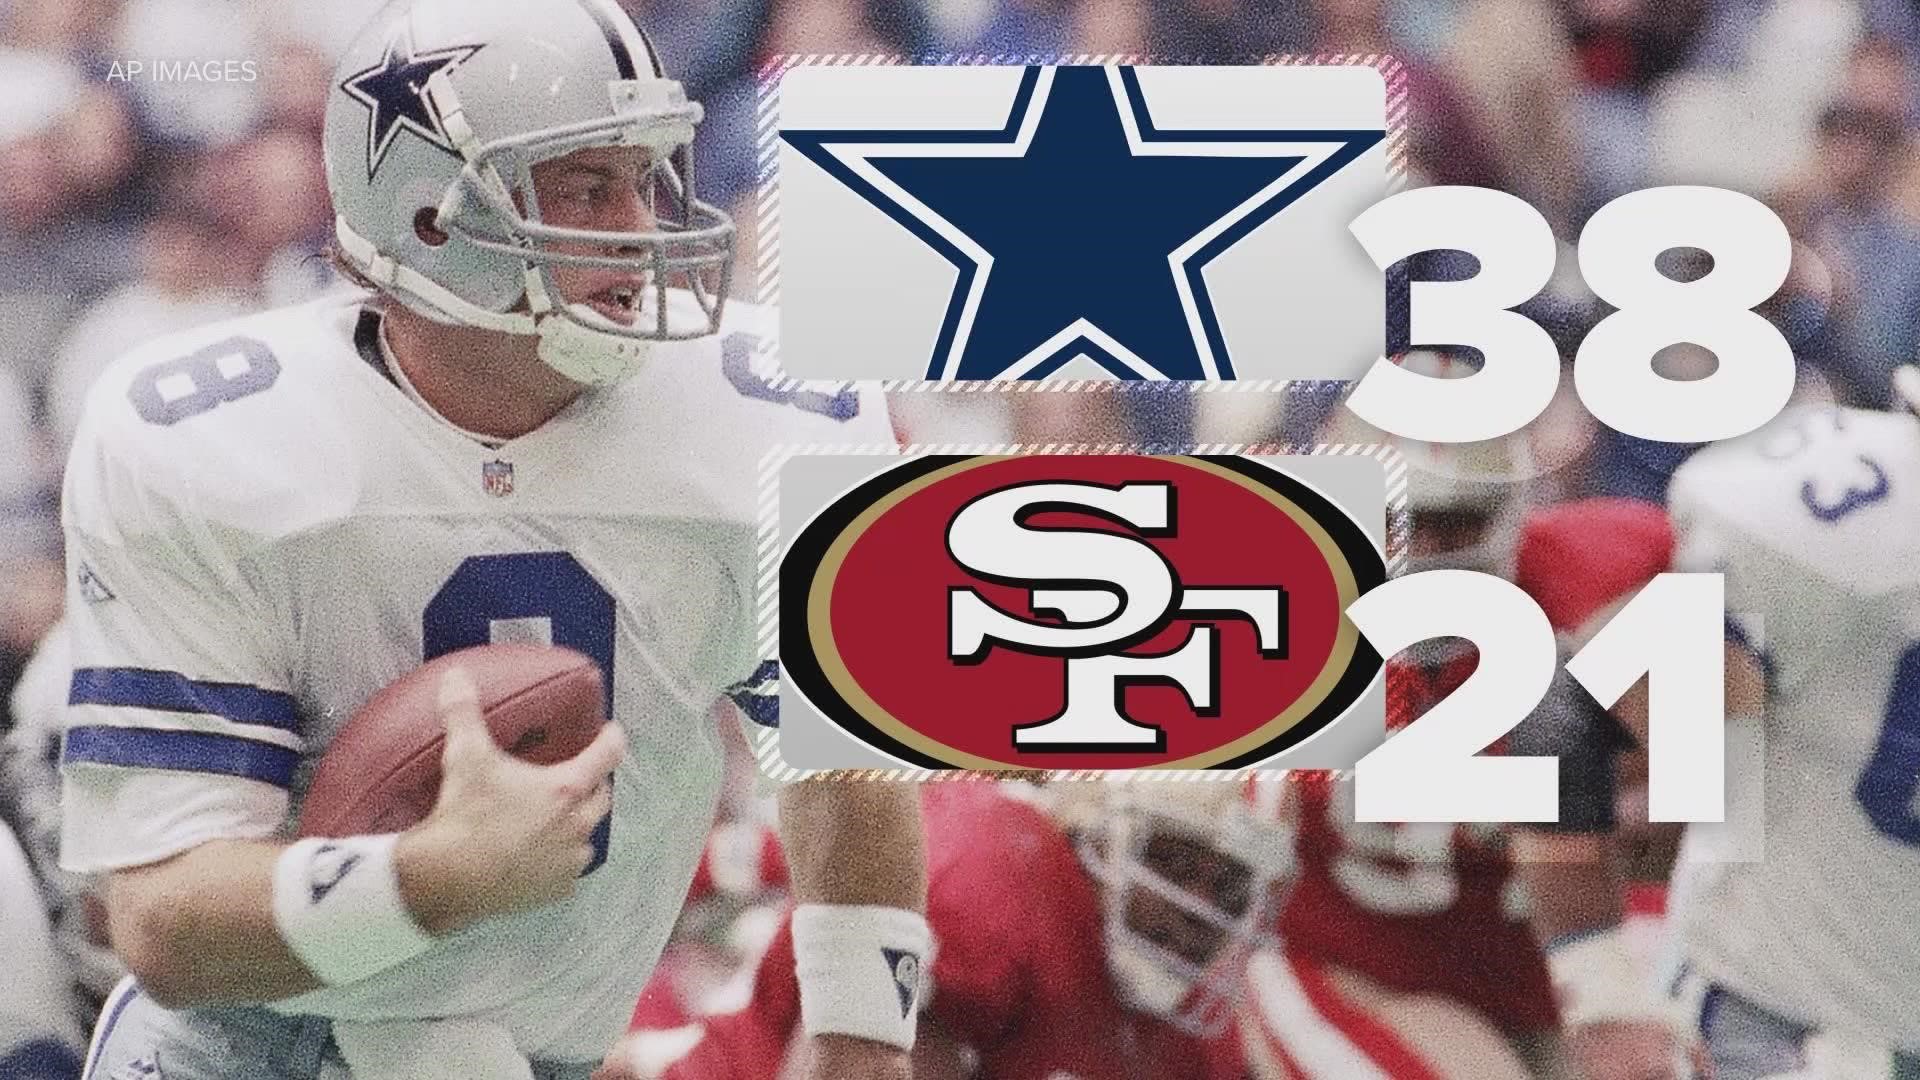 what day do the cowboys play the 49ers